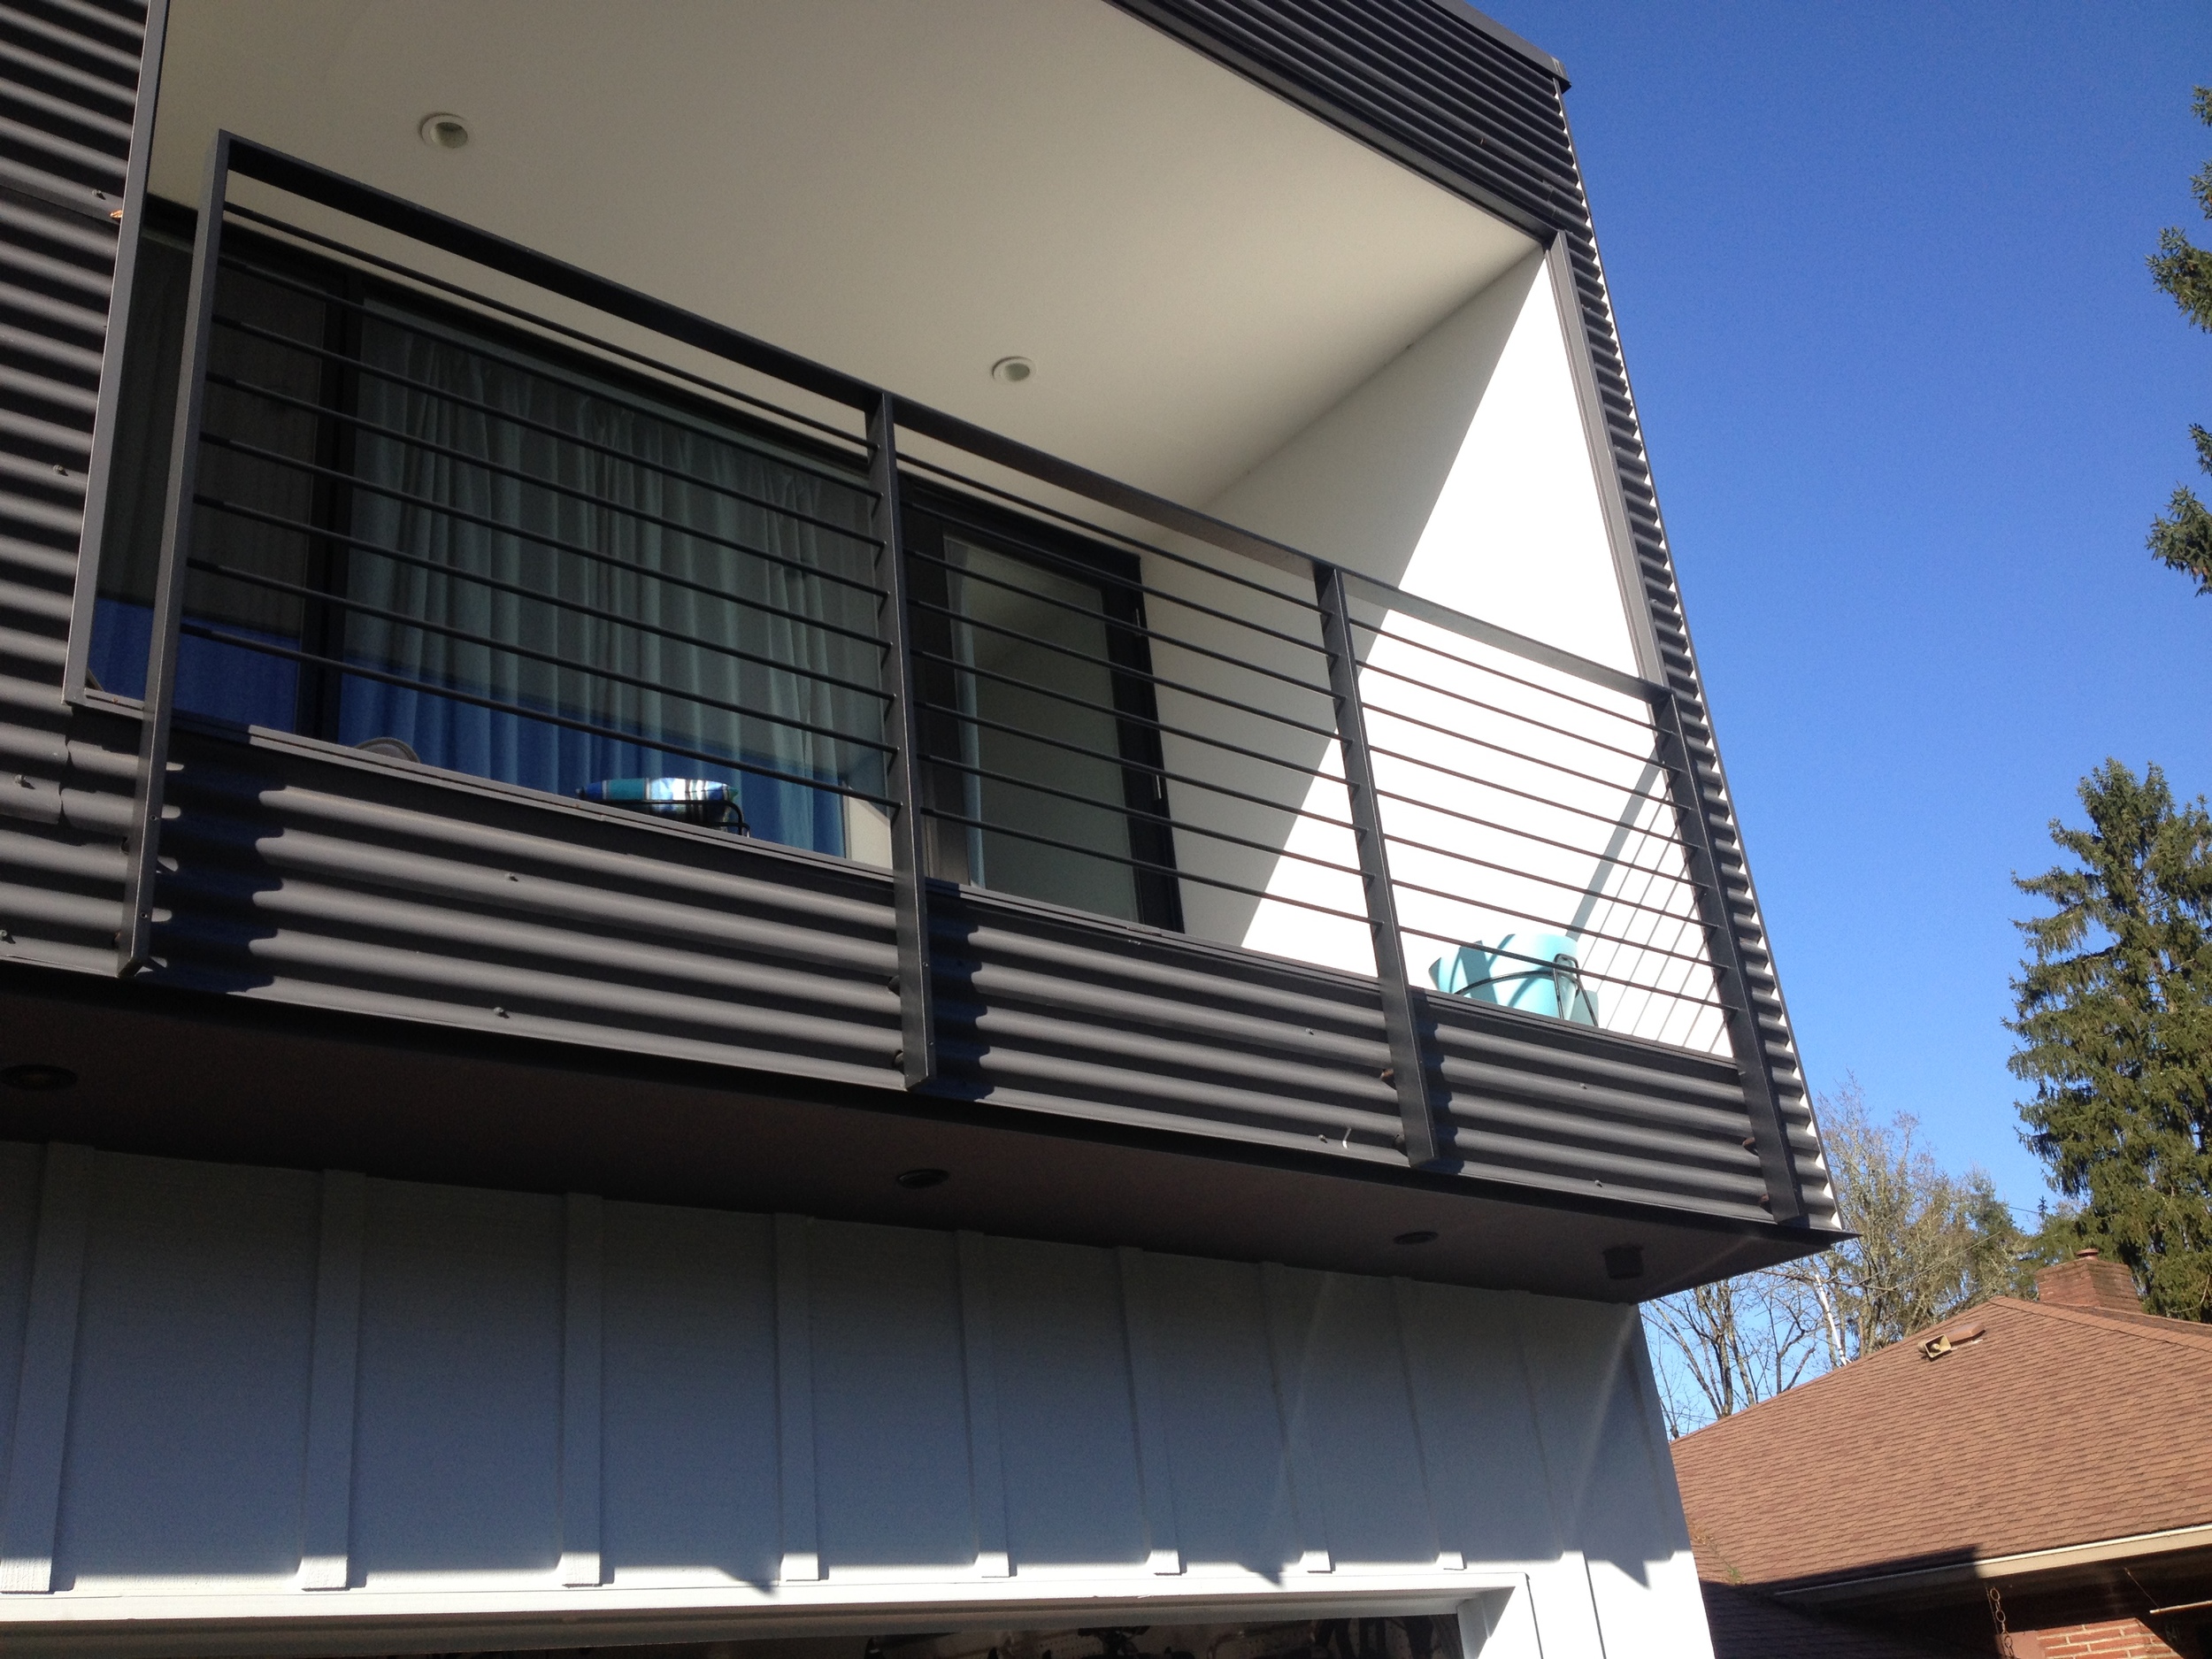  Painted steel railing with round rod infill  Designed by Paul McKean Architecure 